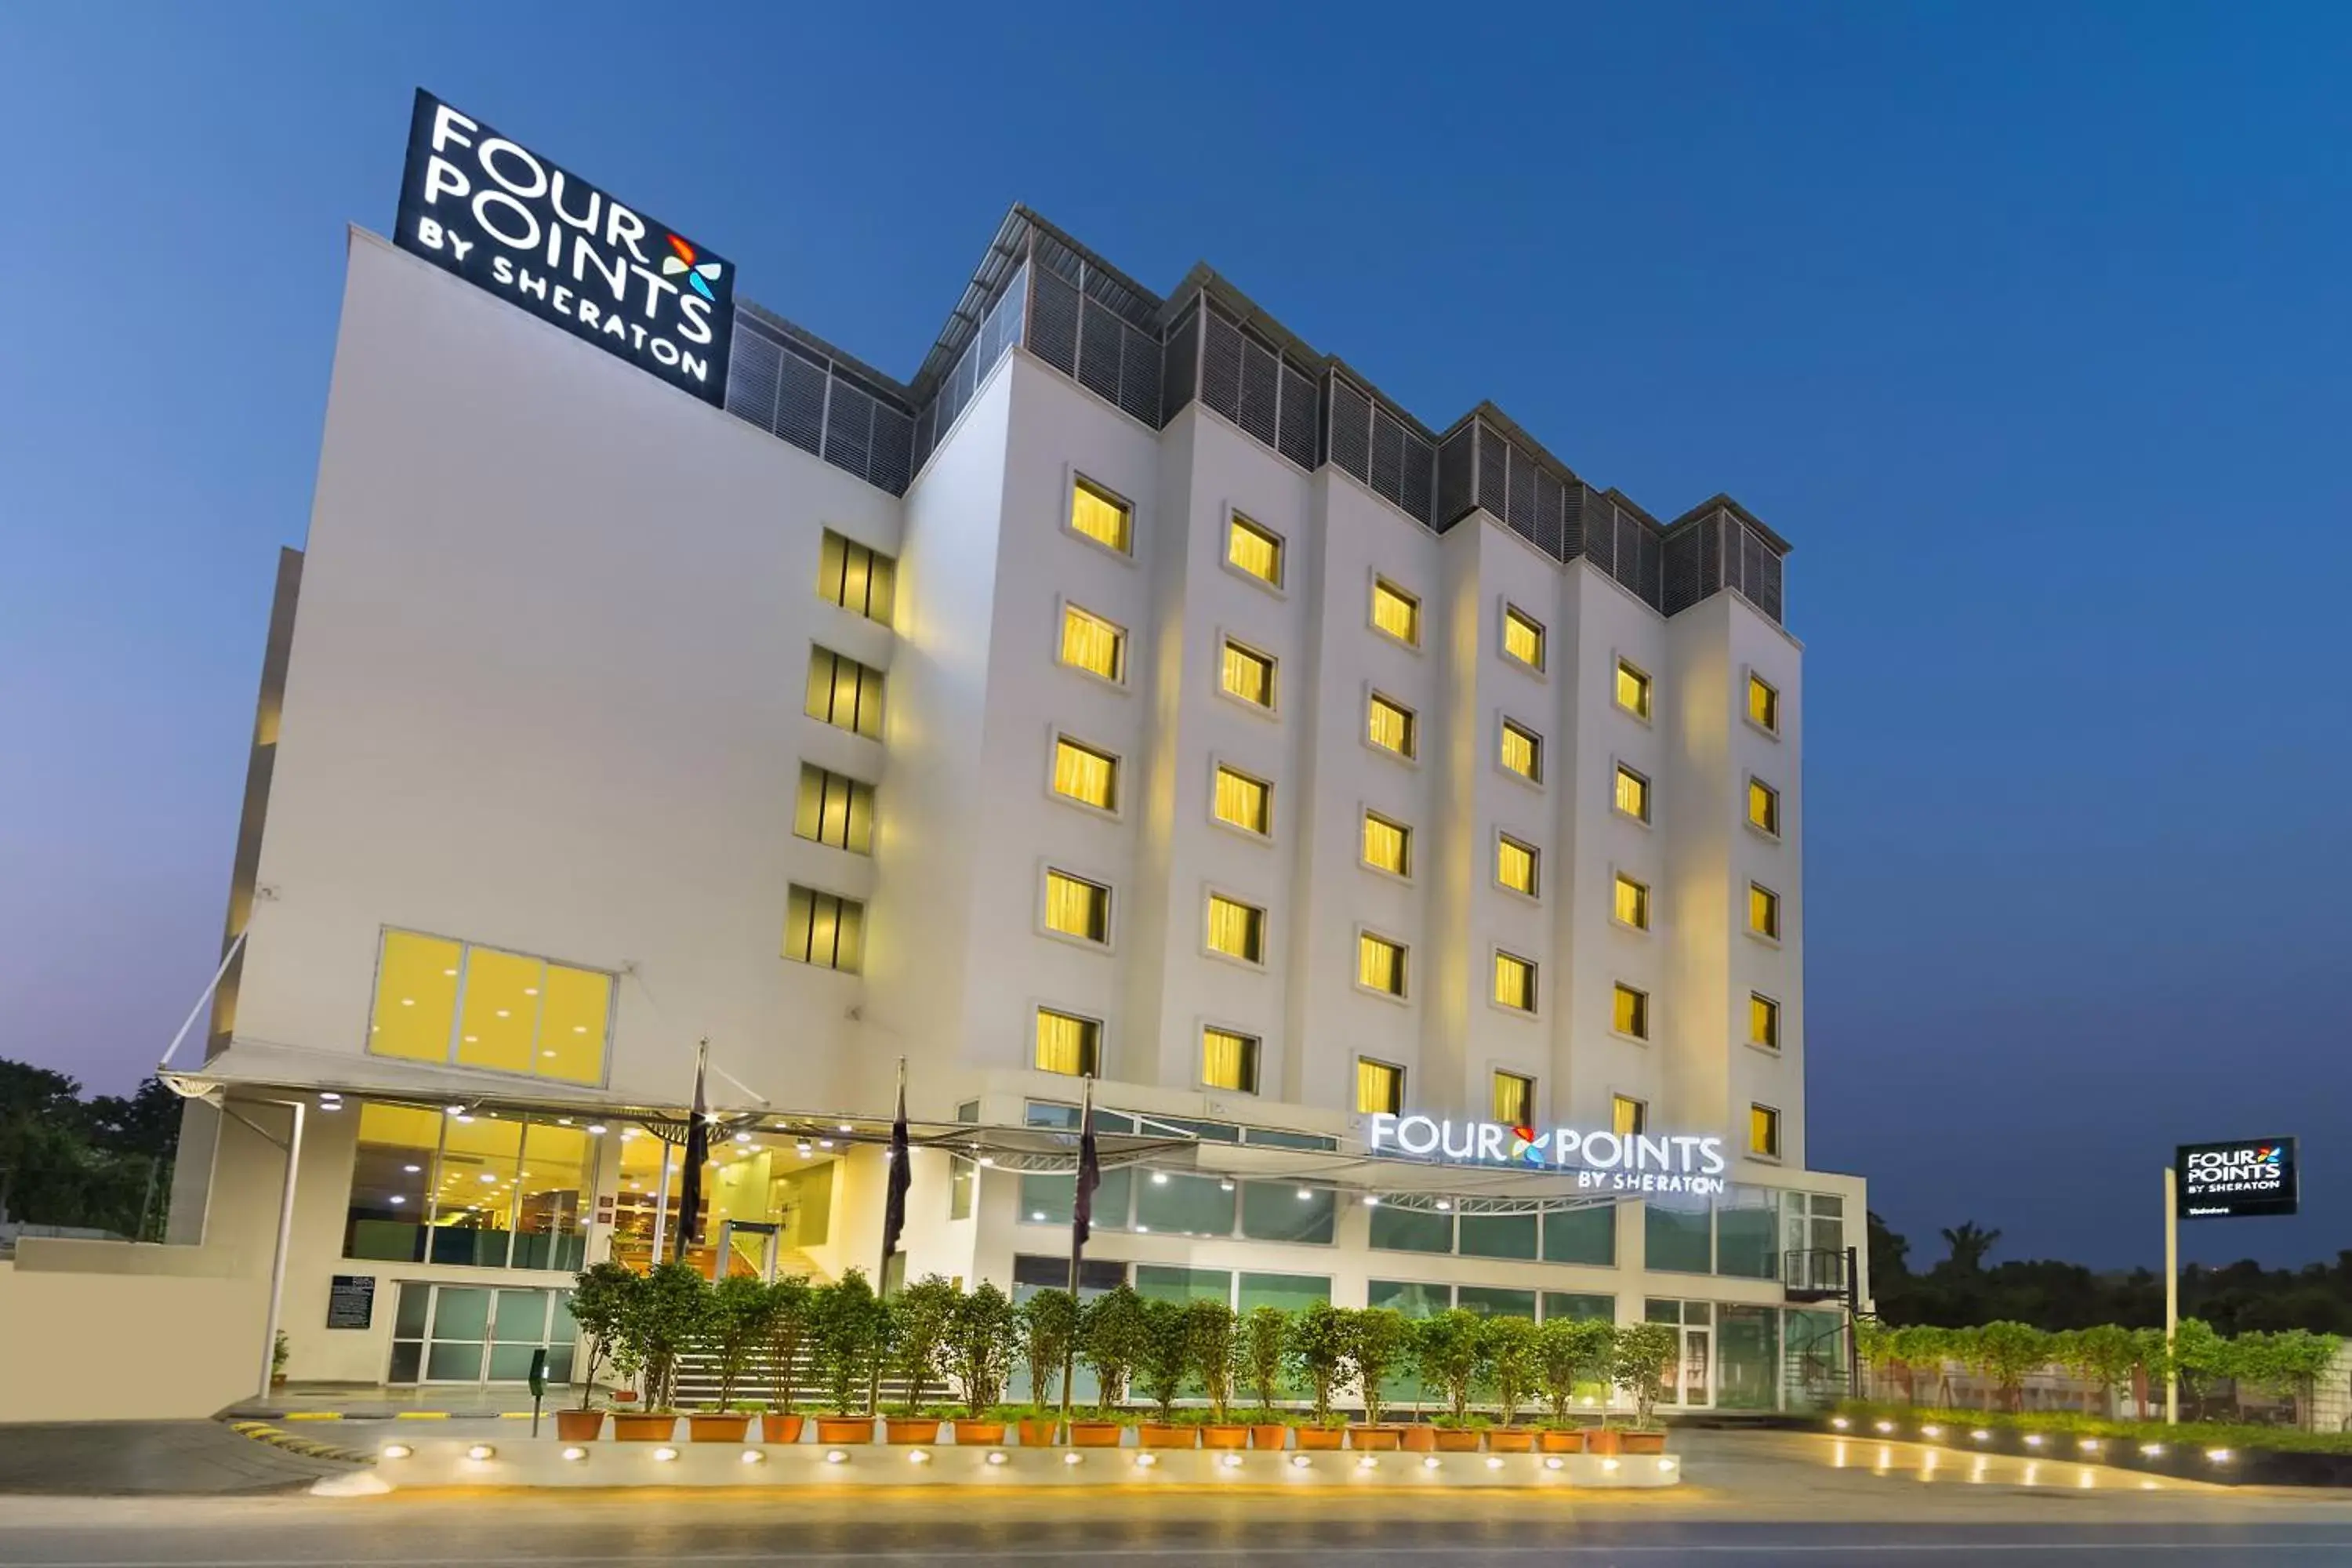 Property Building in Four Points by Sheraton Vadodara